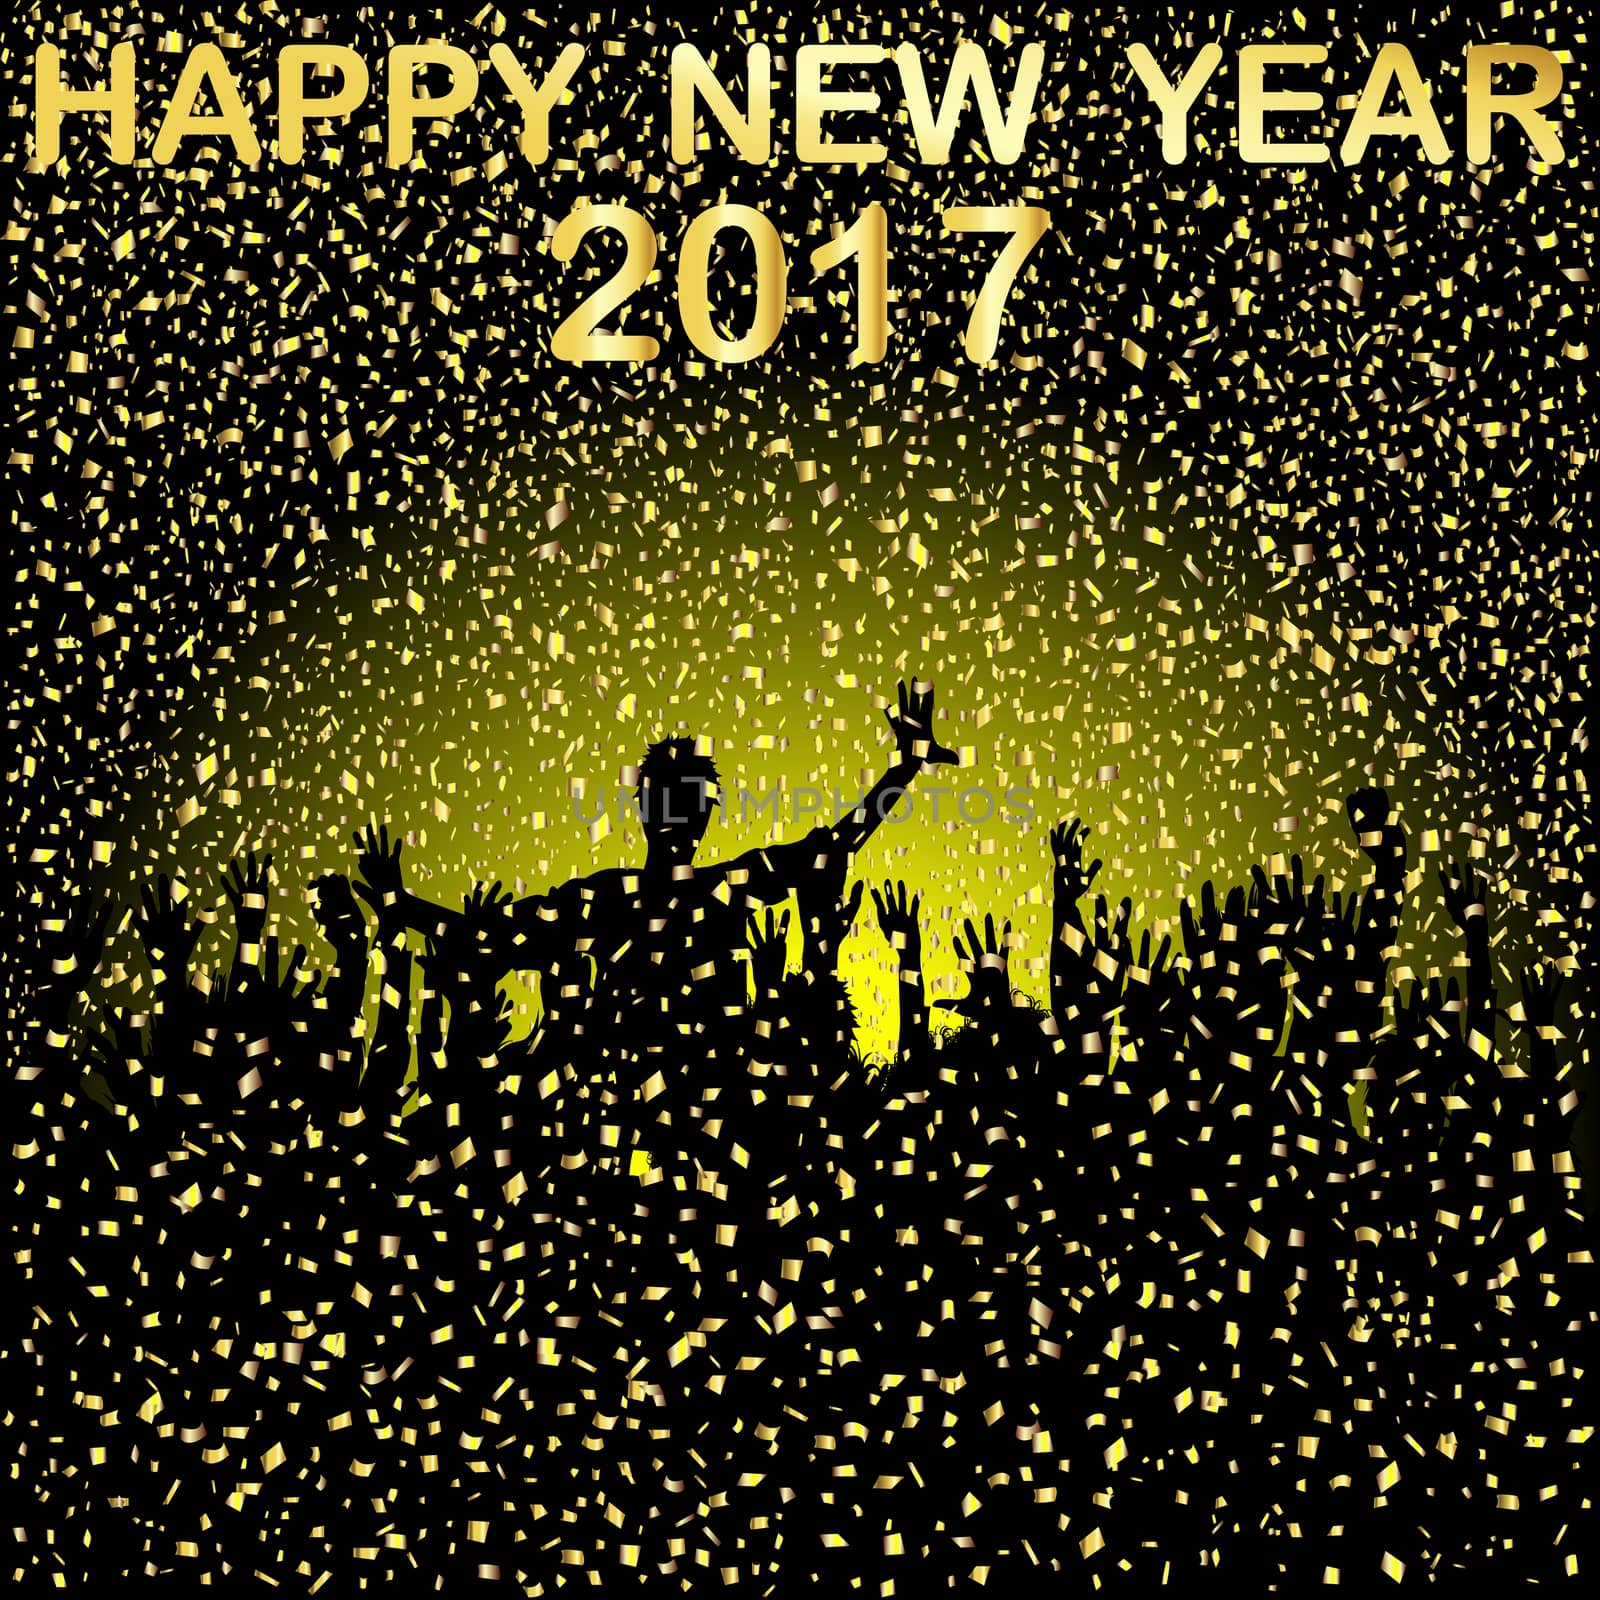 Group of people silhouettes celebrating New Year's Eve, 2017